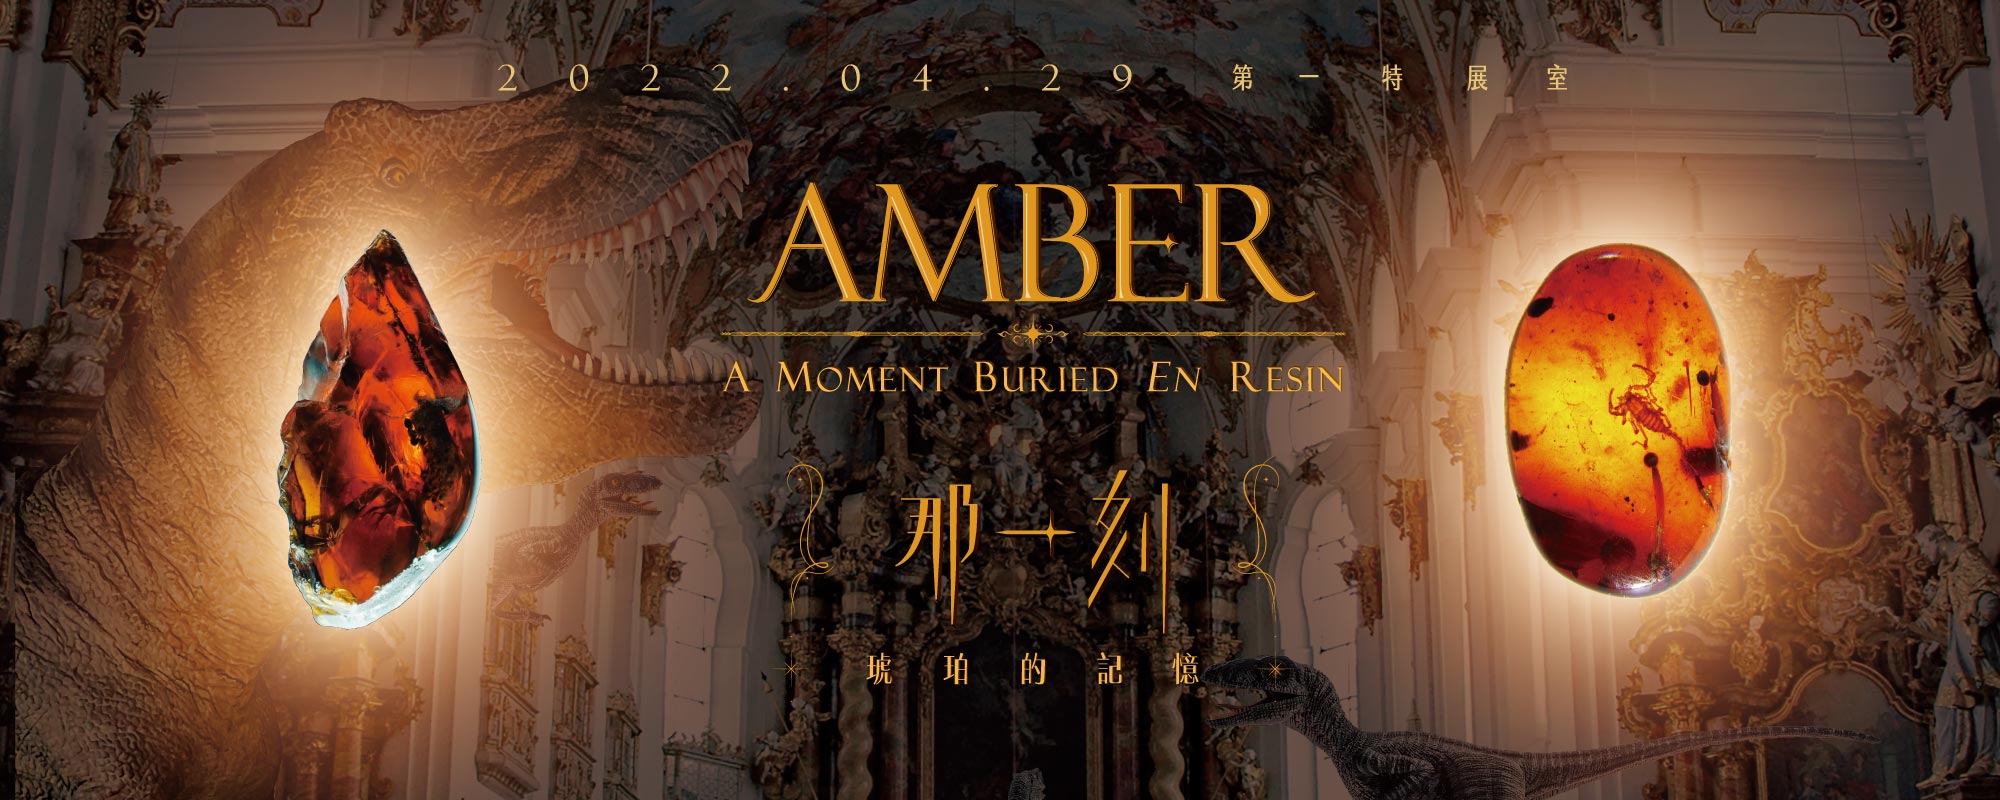 AMBER - A MOMENT BURIED EN RESIN